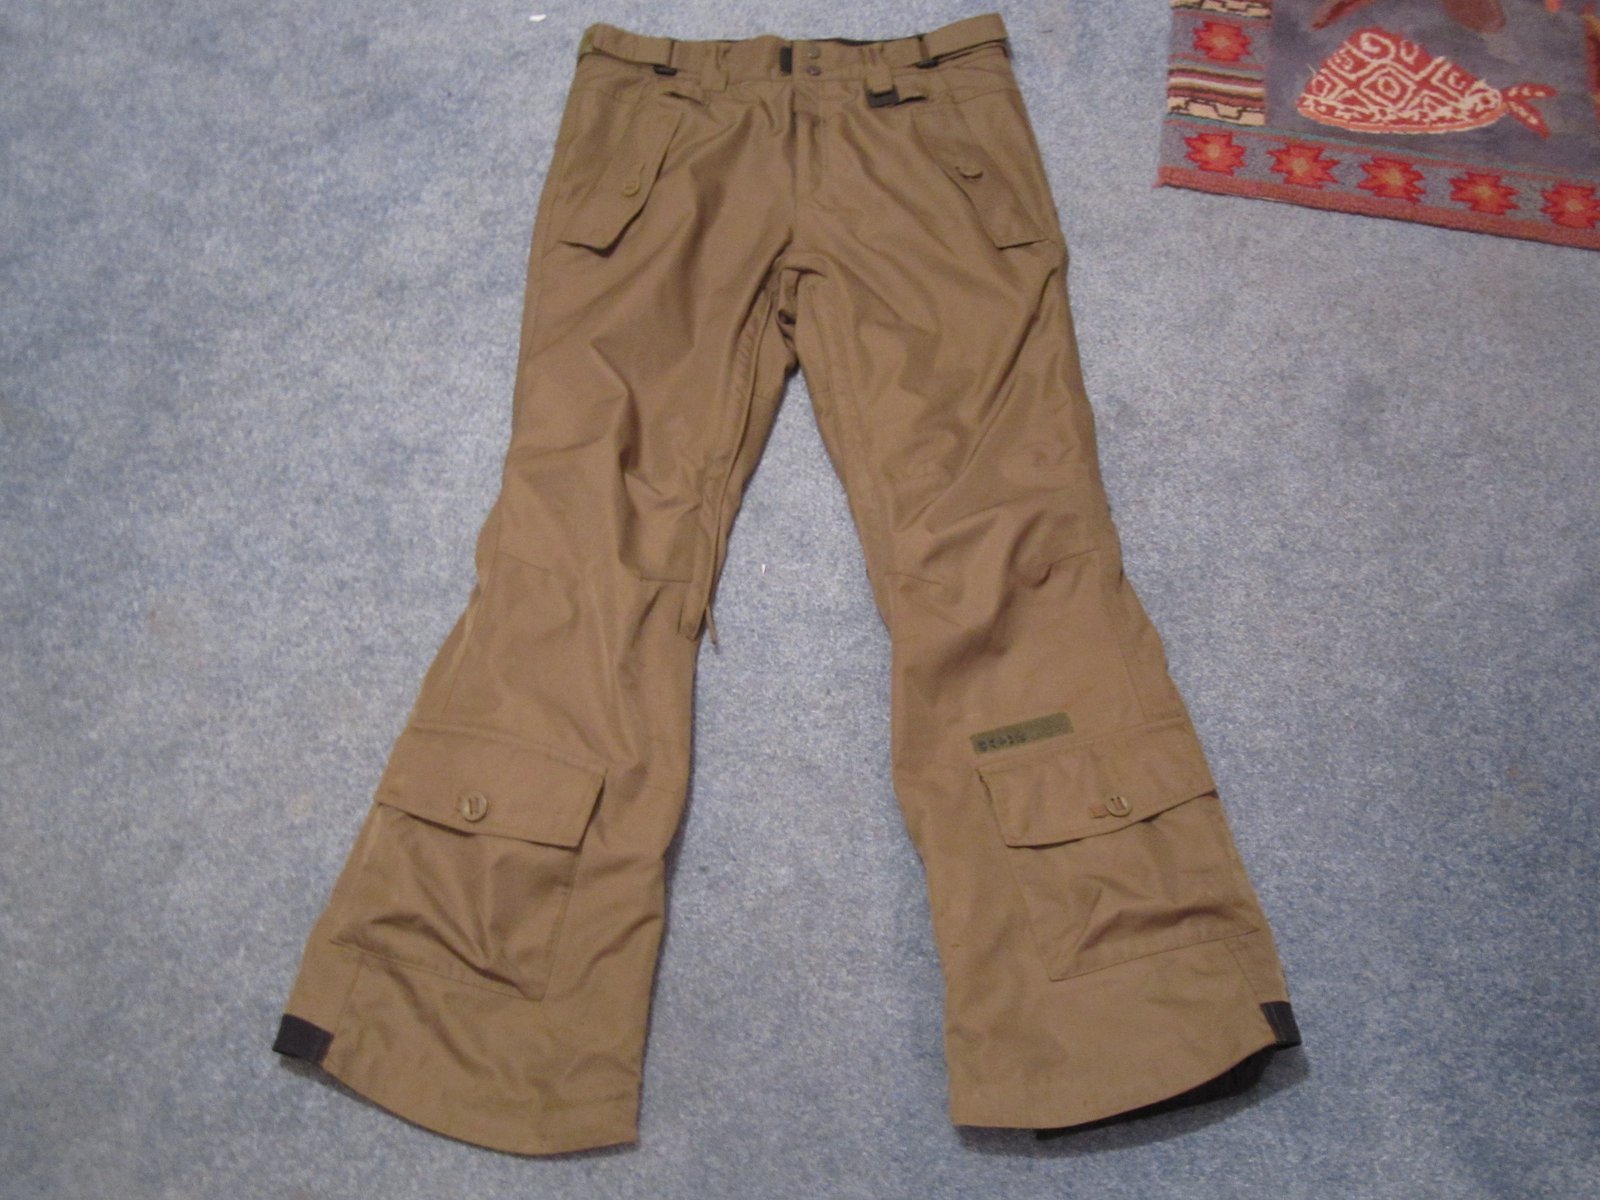 Pants For Sale